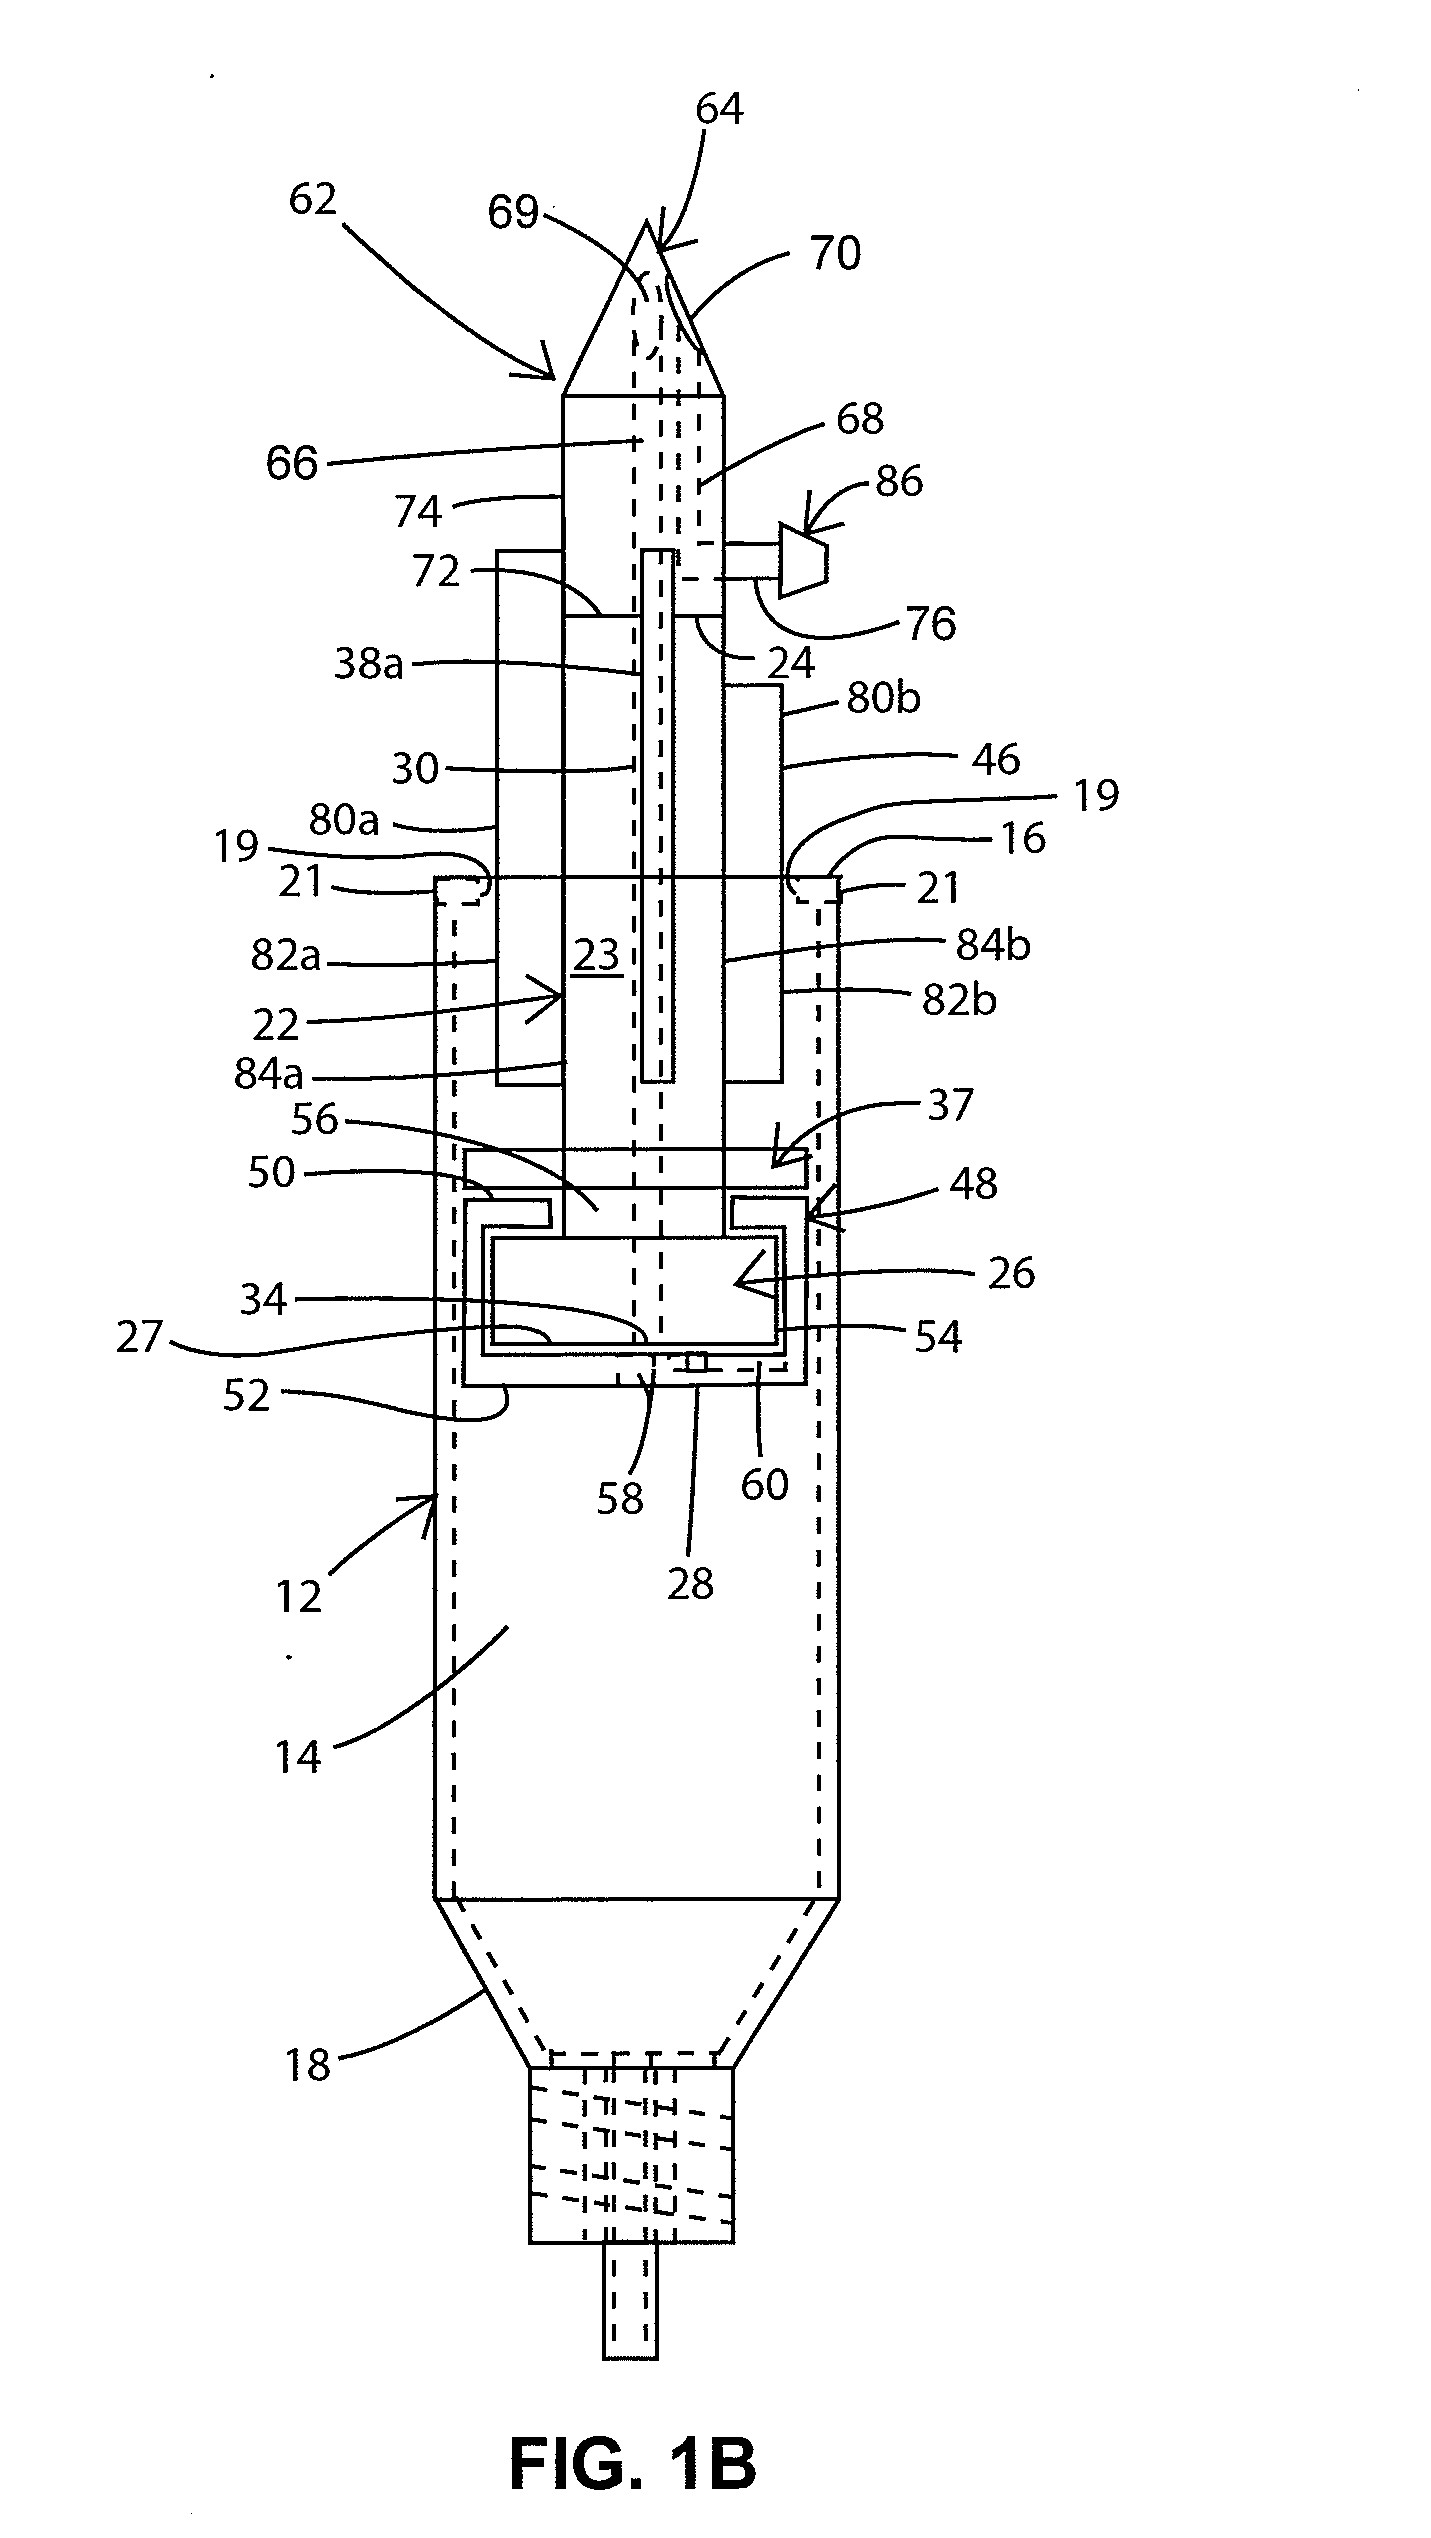 Apparatus for mixing and transferring medications